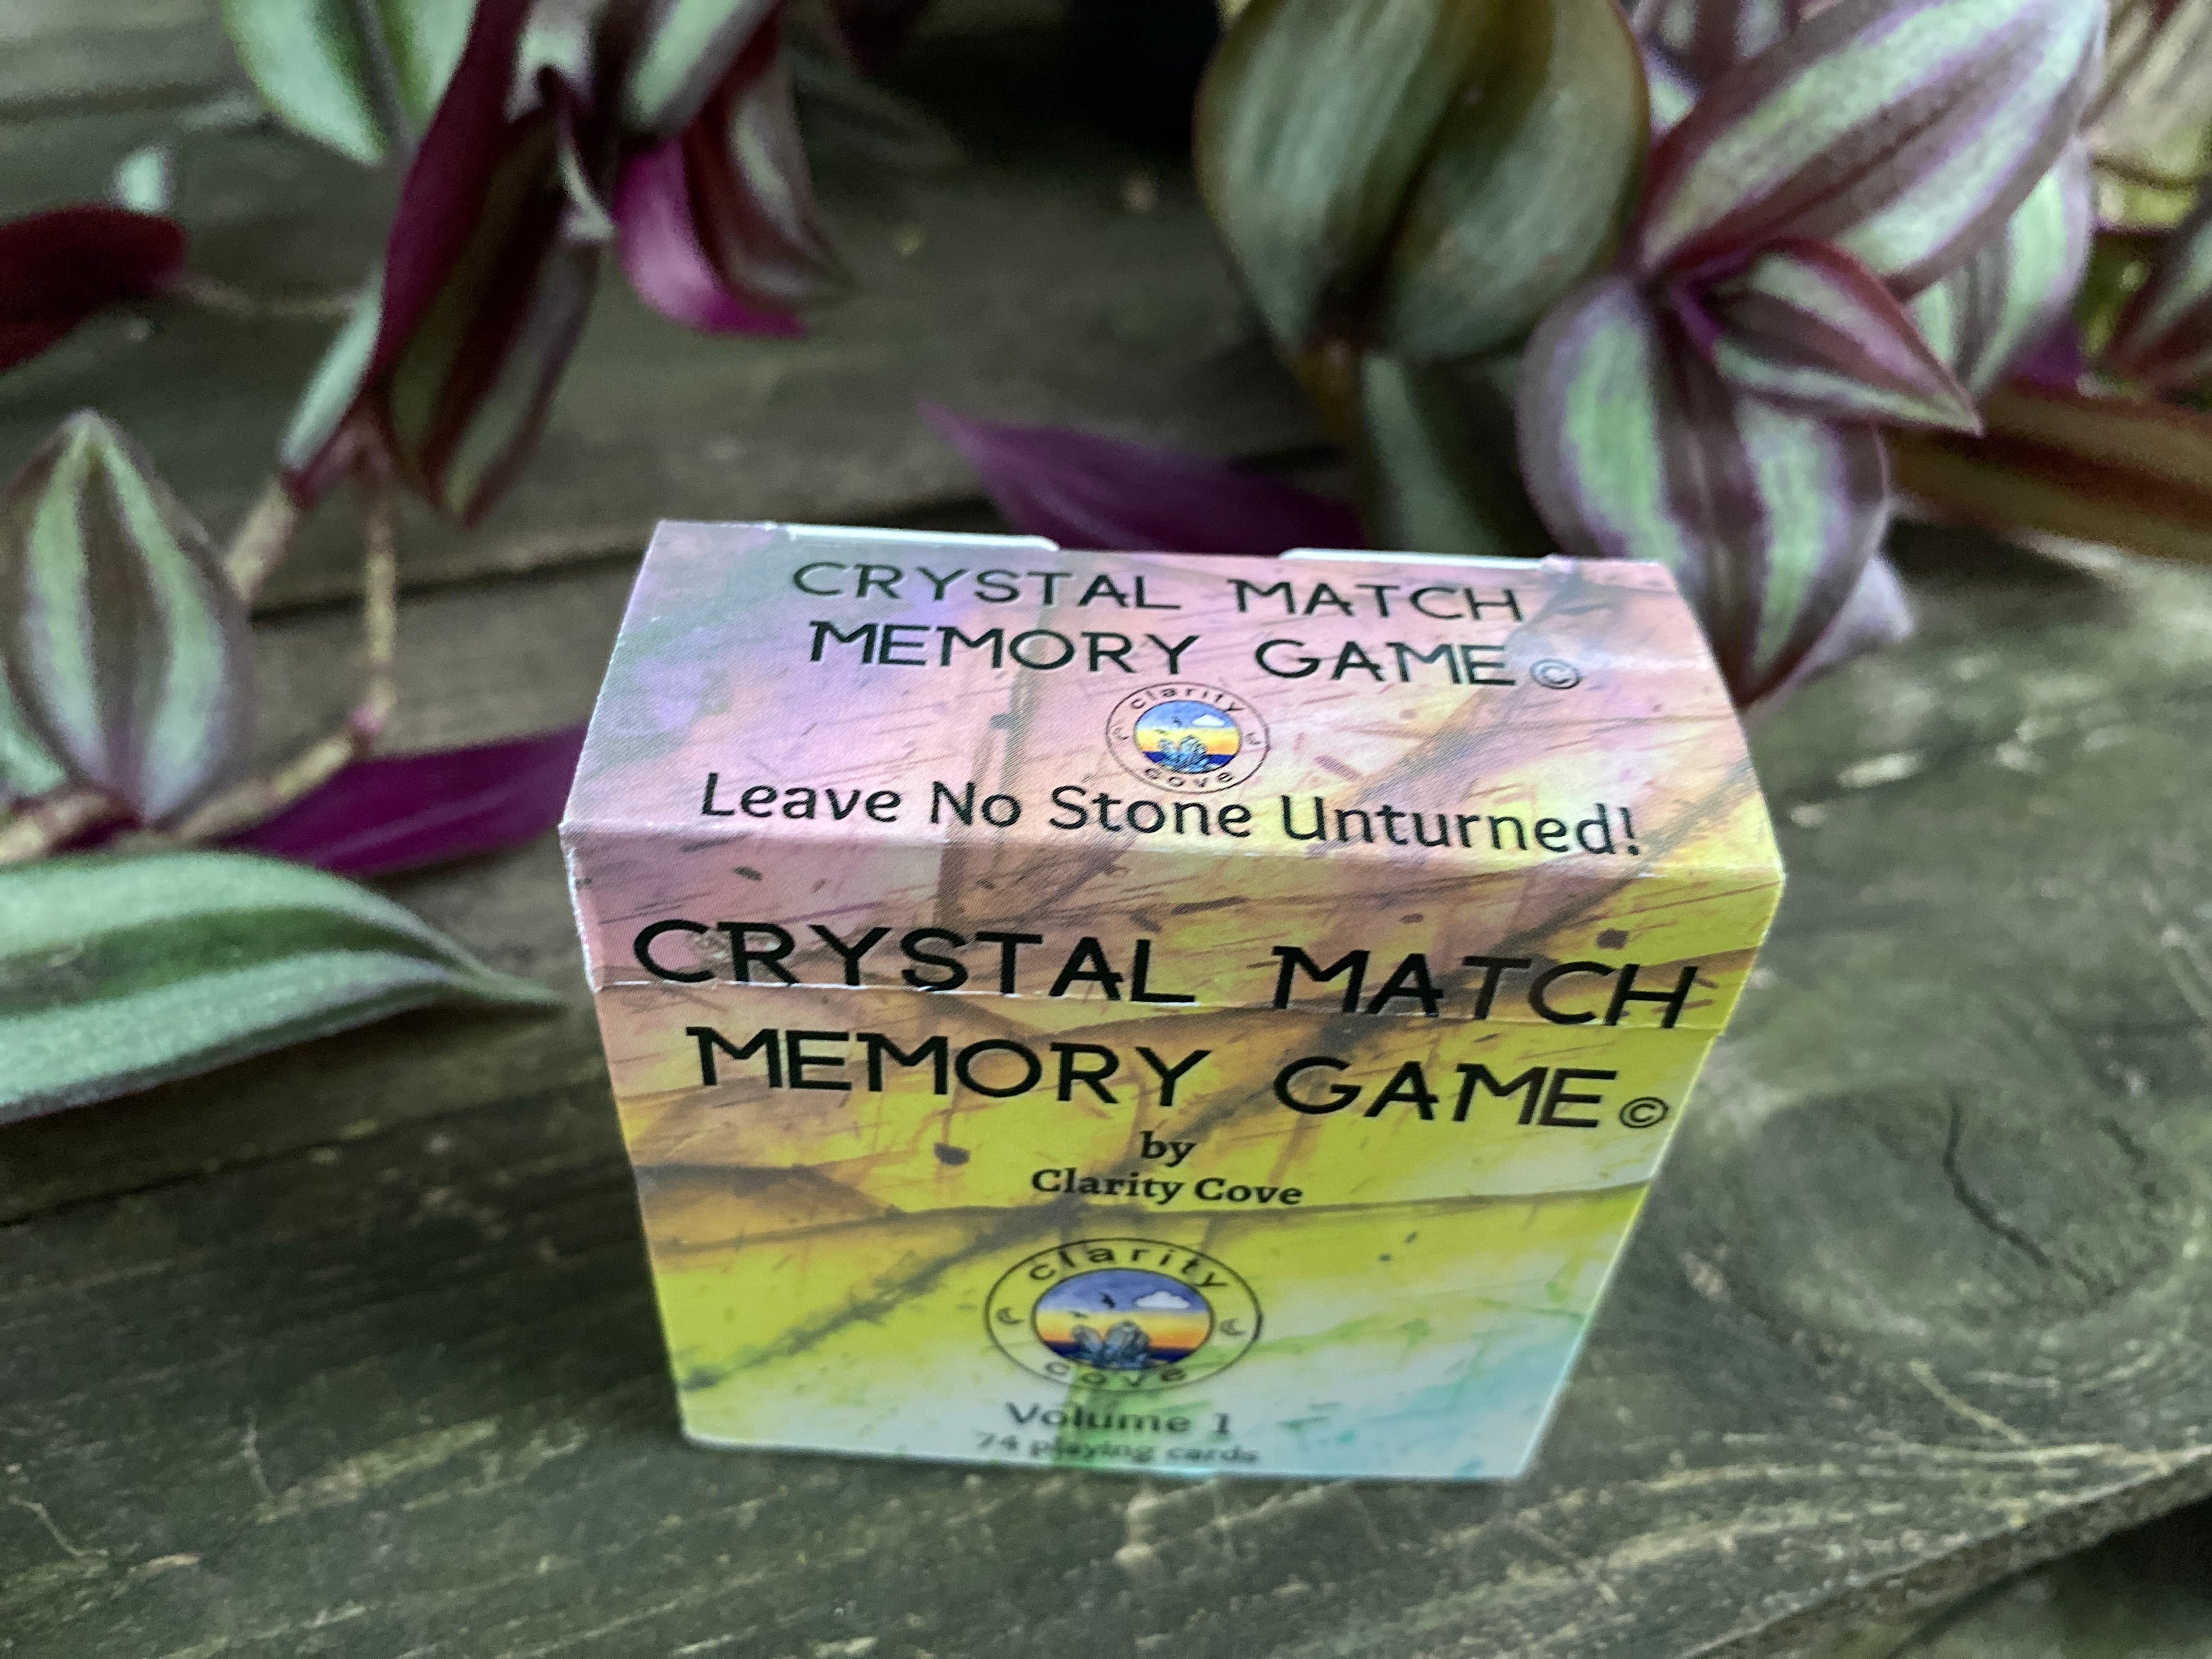 Crystal Match Memory Game Fun Geology Card Game from The Crystal Collection